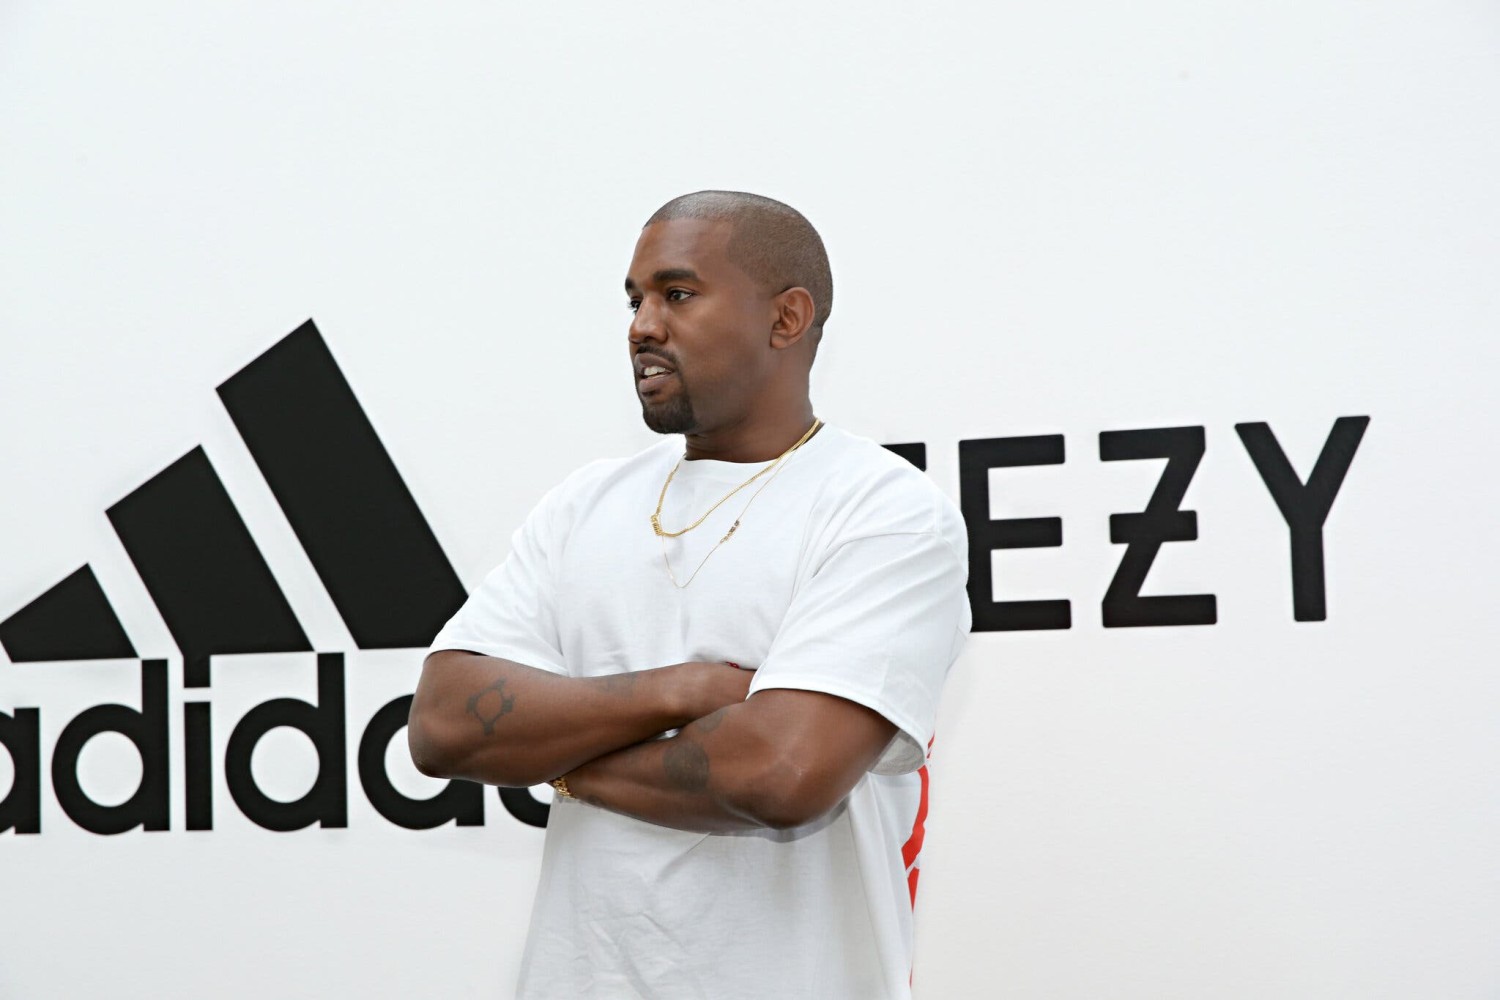 Kanye and Adidas: Money, Misconduct and the Price of Appeasement